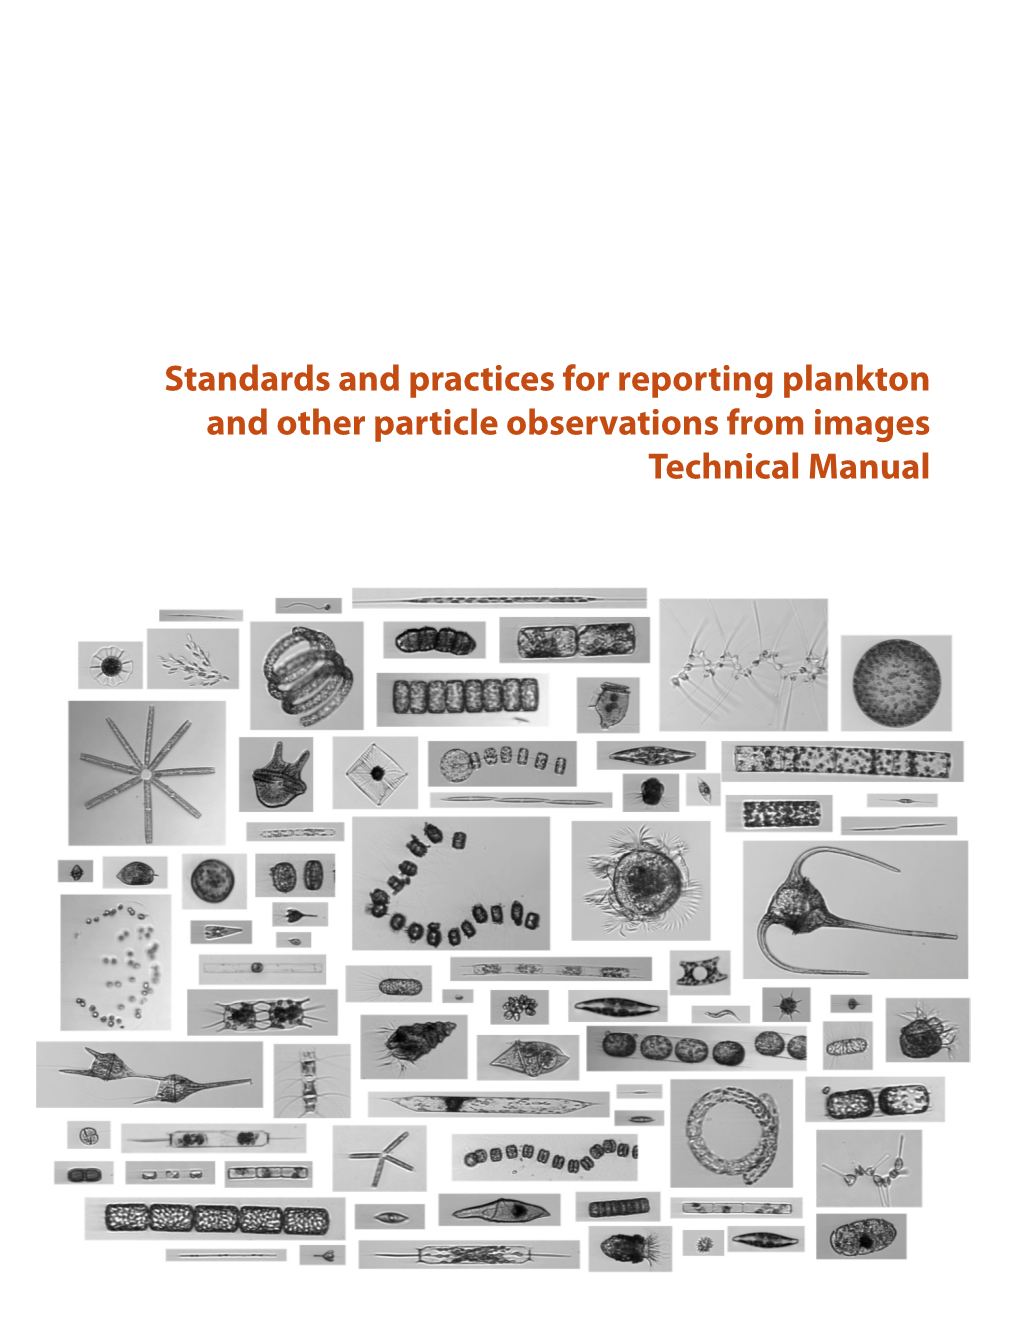 Standards and Practices for Reporting Plankton and Other Particle